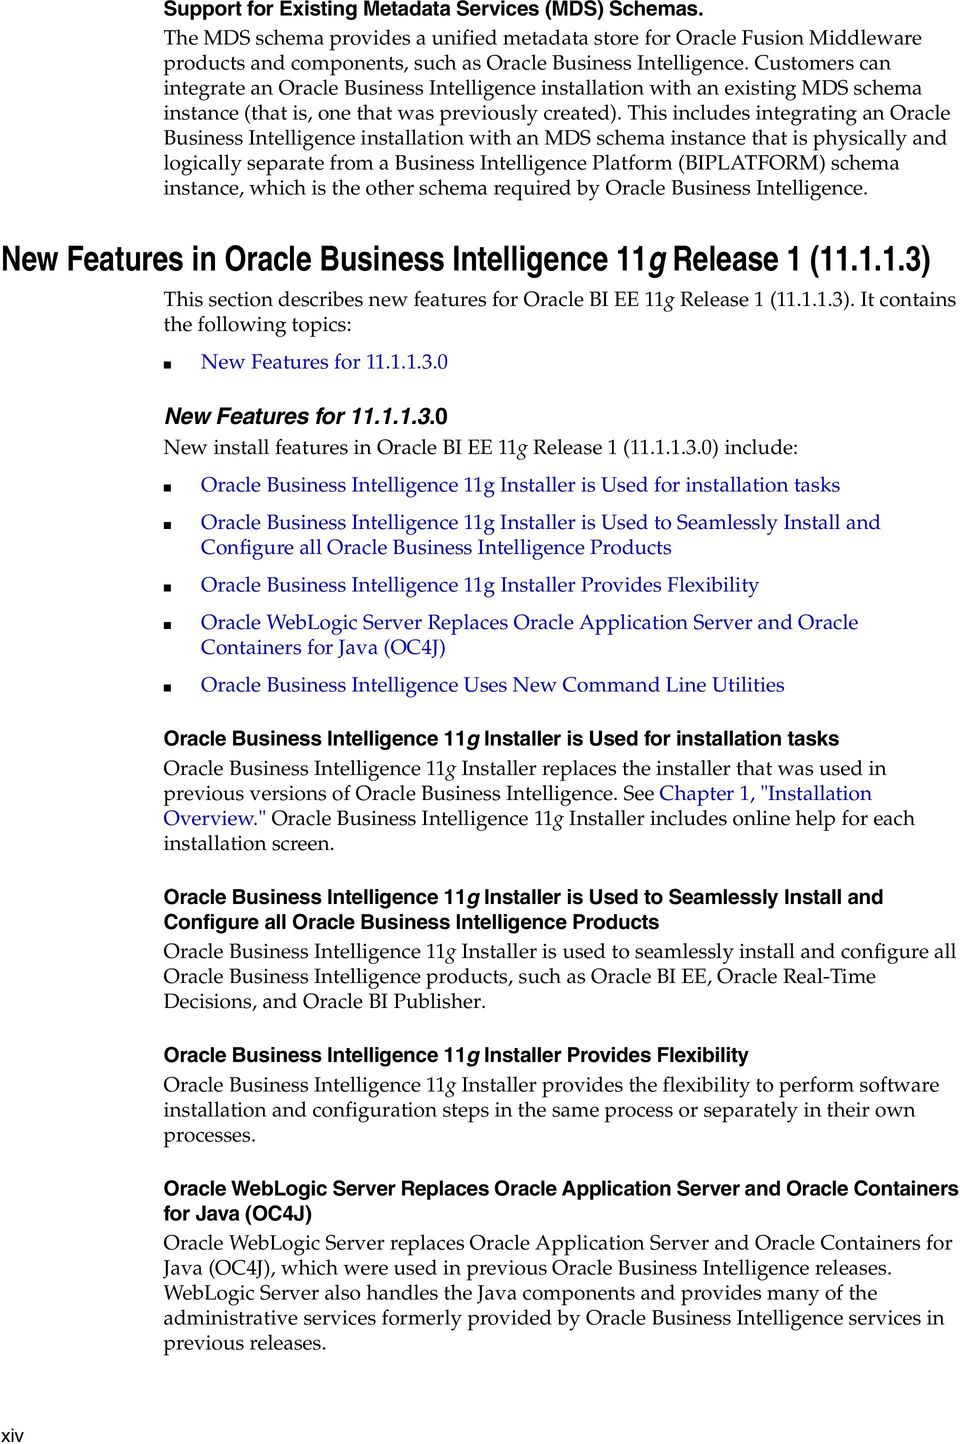 This includes integrating an Oracle Business Intelligence installation with an MDS schema instance that is physically and logically separate from a Business Intelligence Platform (BIPLATFORM) schema